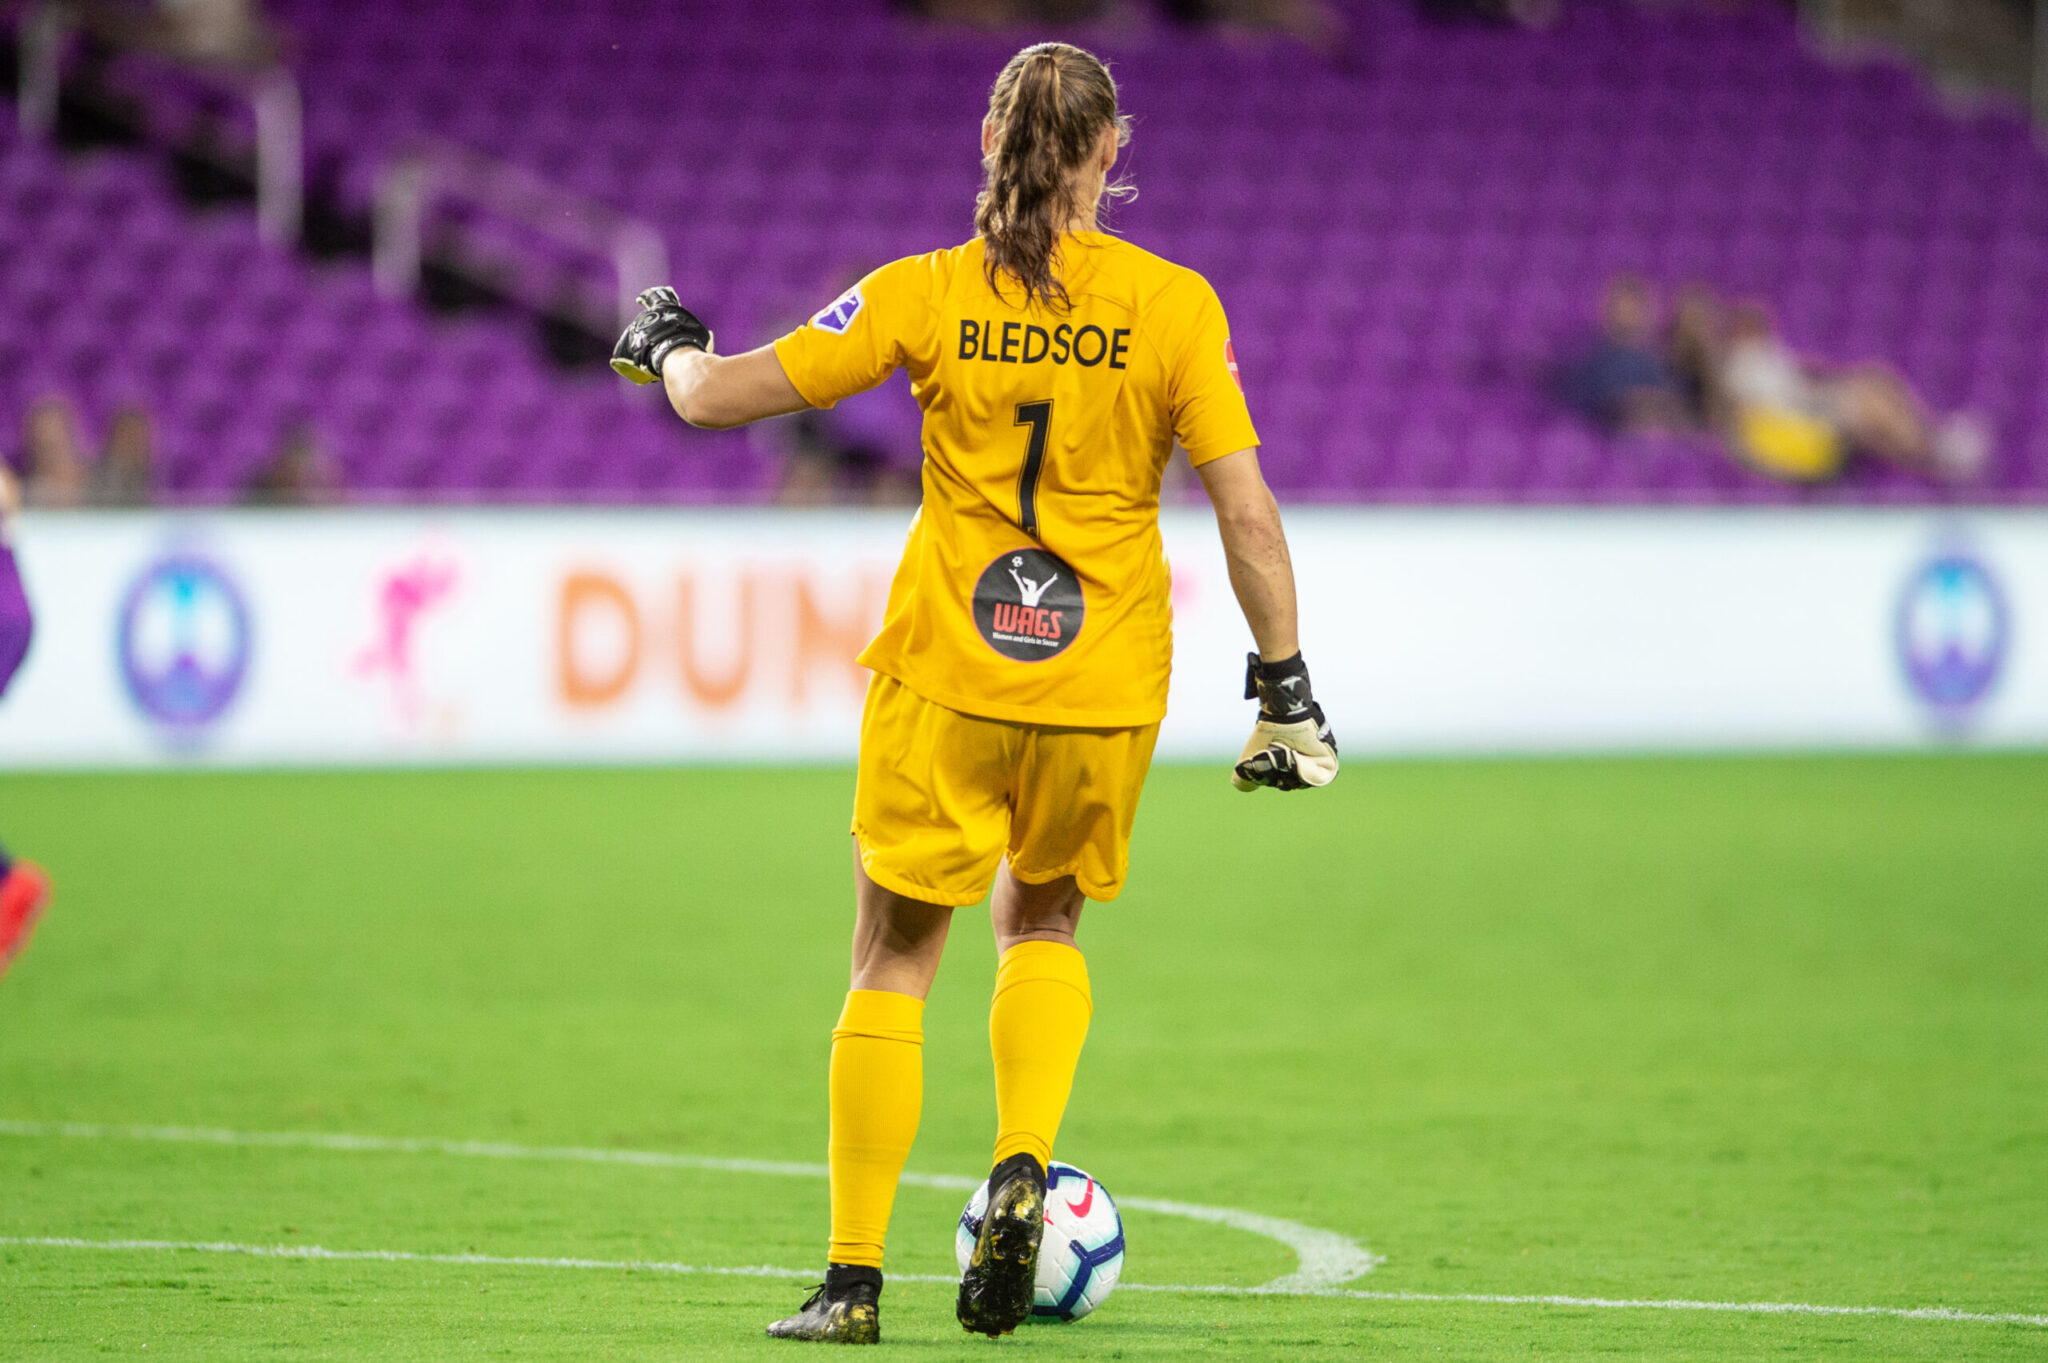 Aubrey Bledsoe wins Save of the Week for fourth time in 2019 Featured Image